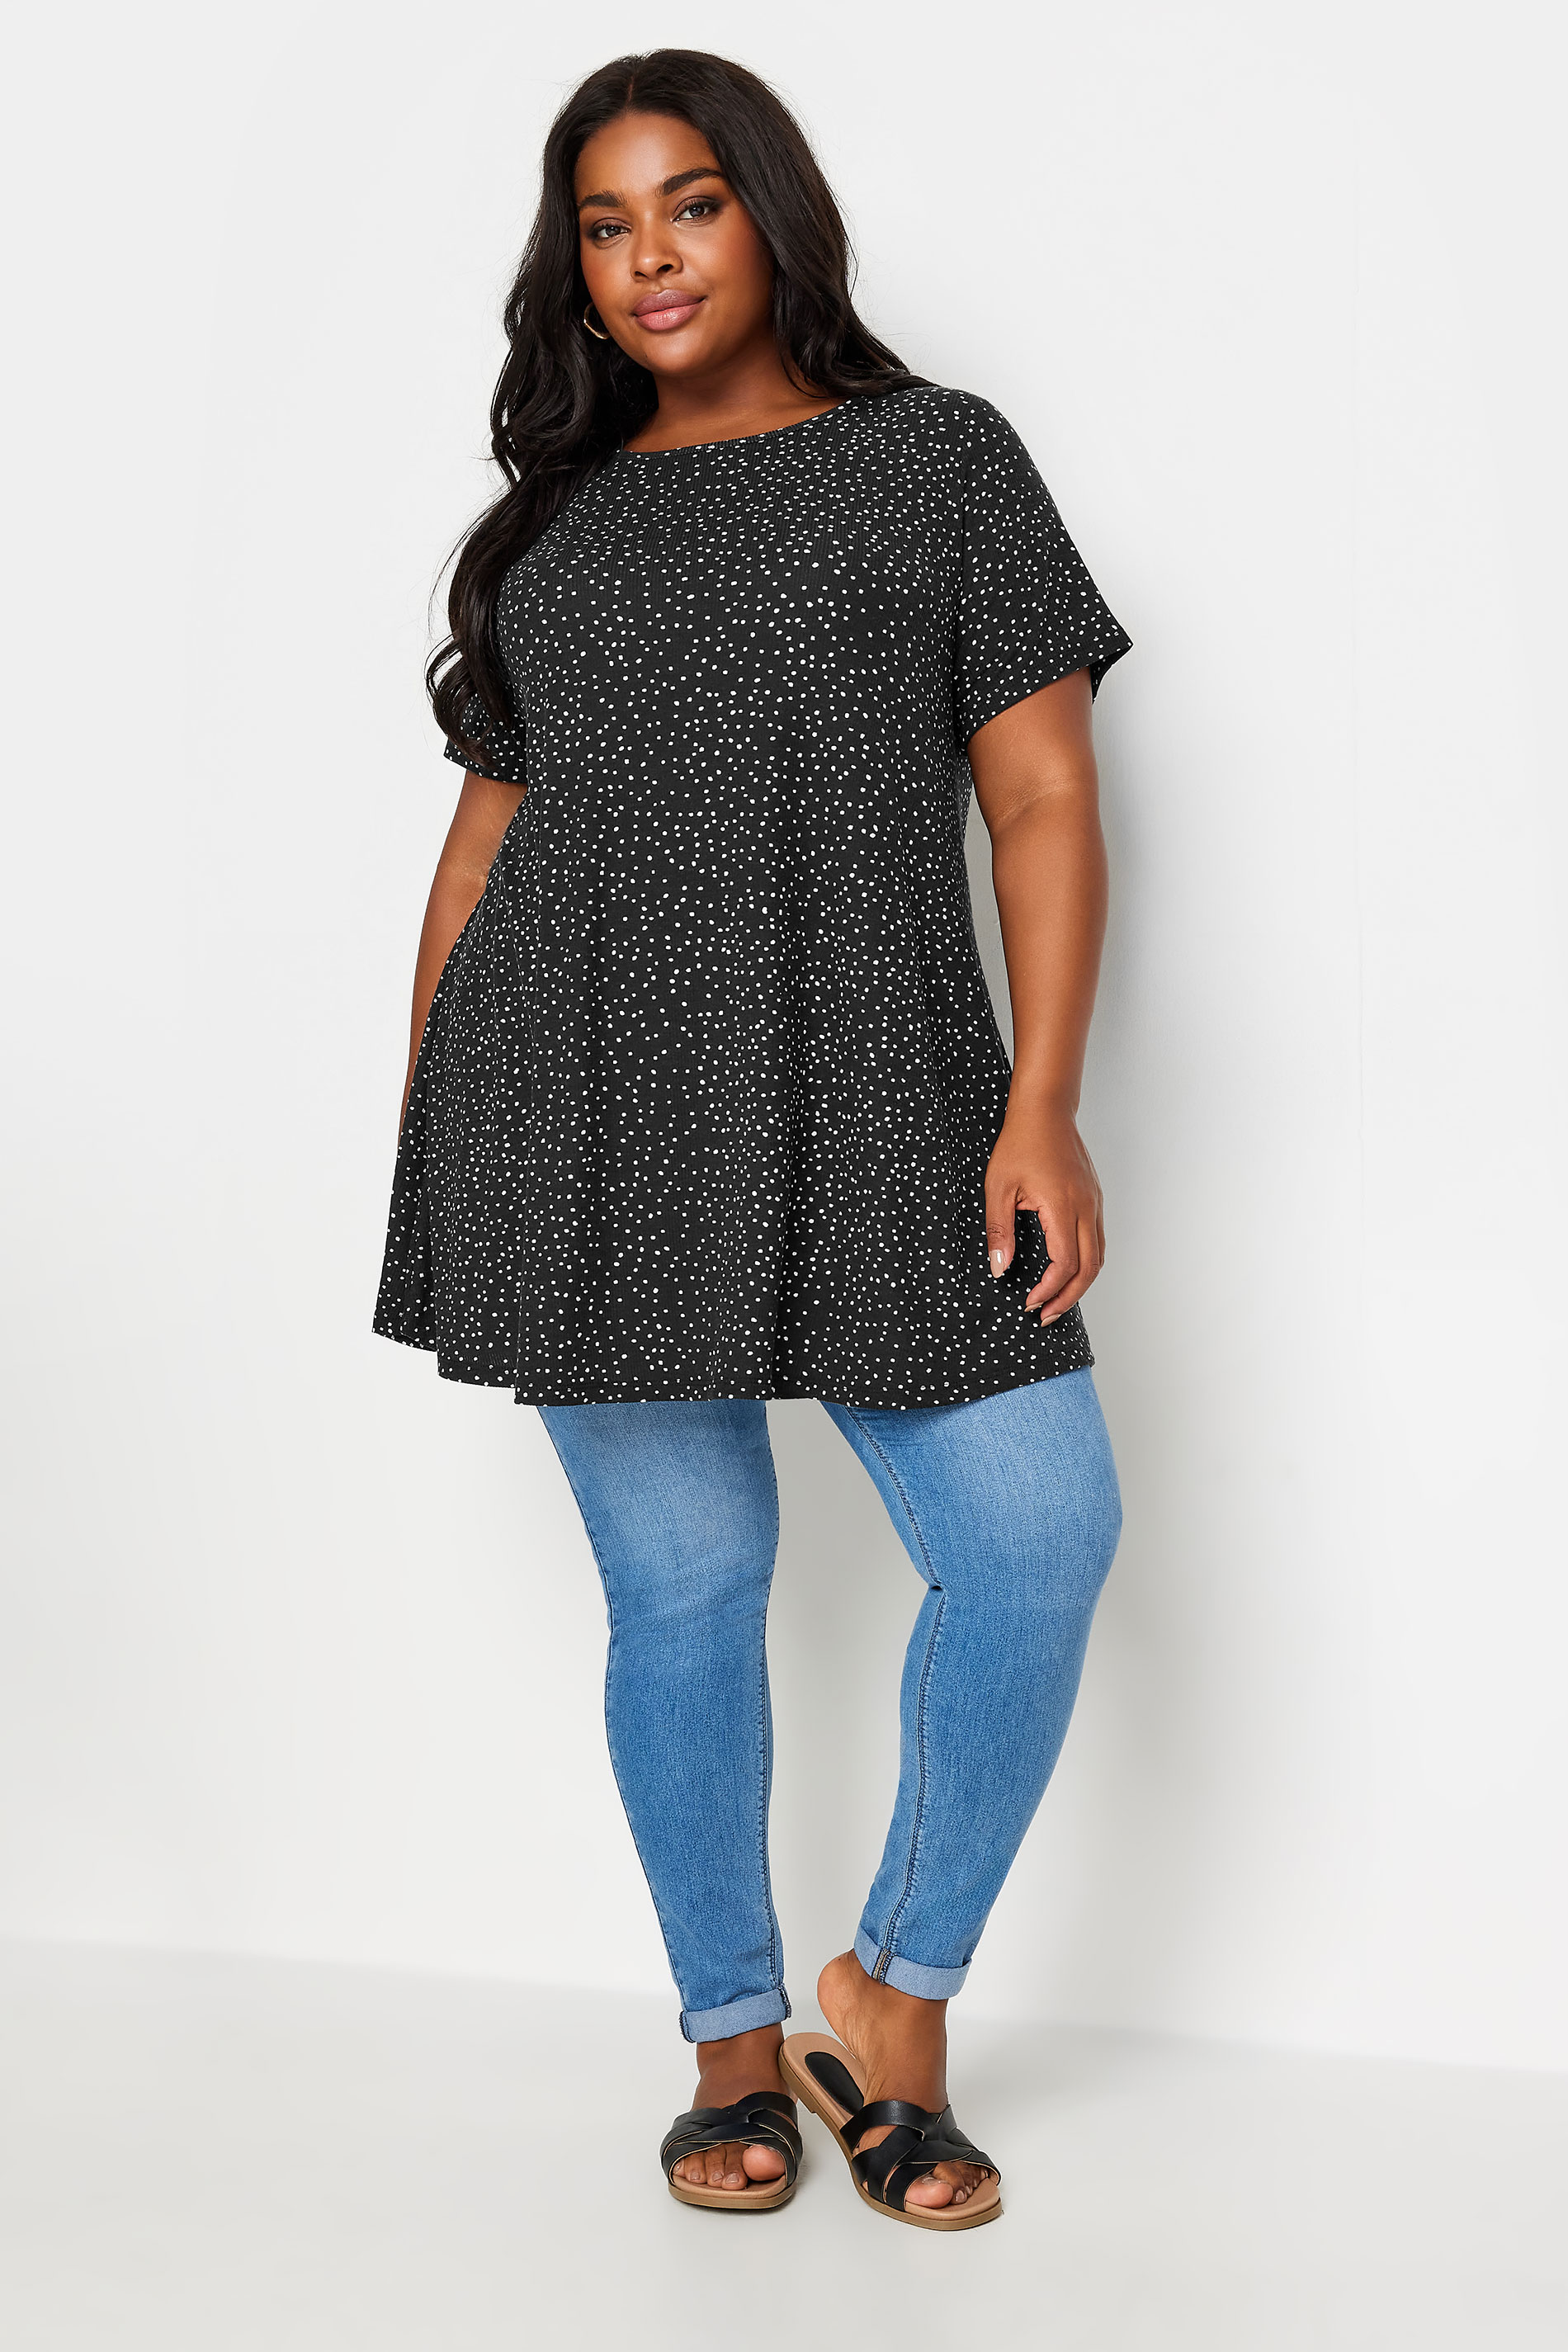 YOURS Plus Size Black Spot Print Top | Yours Clothing 2